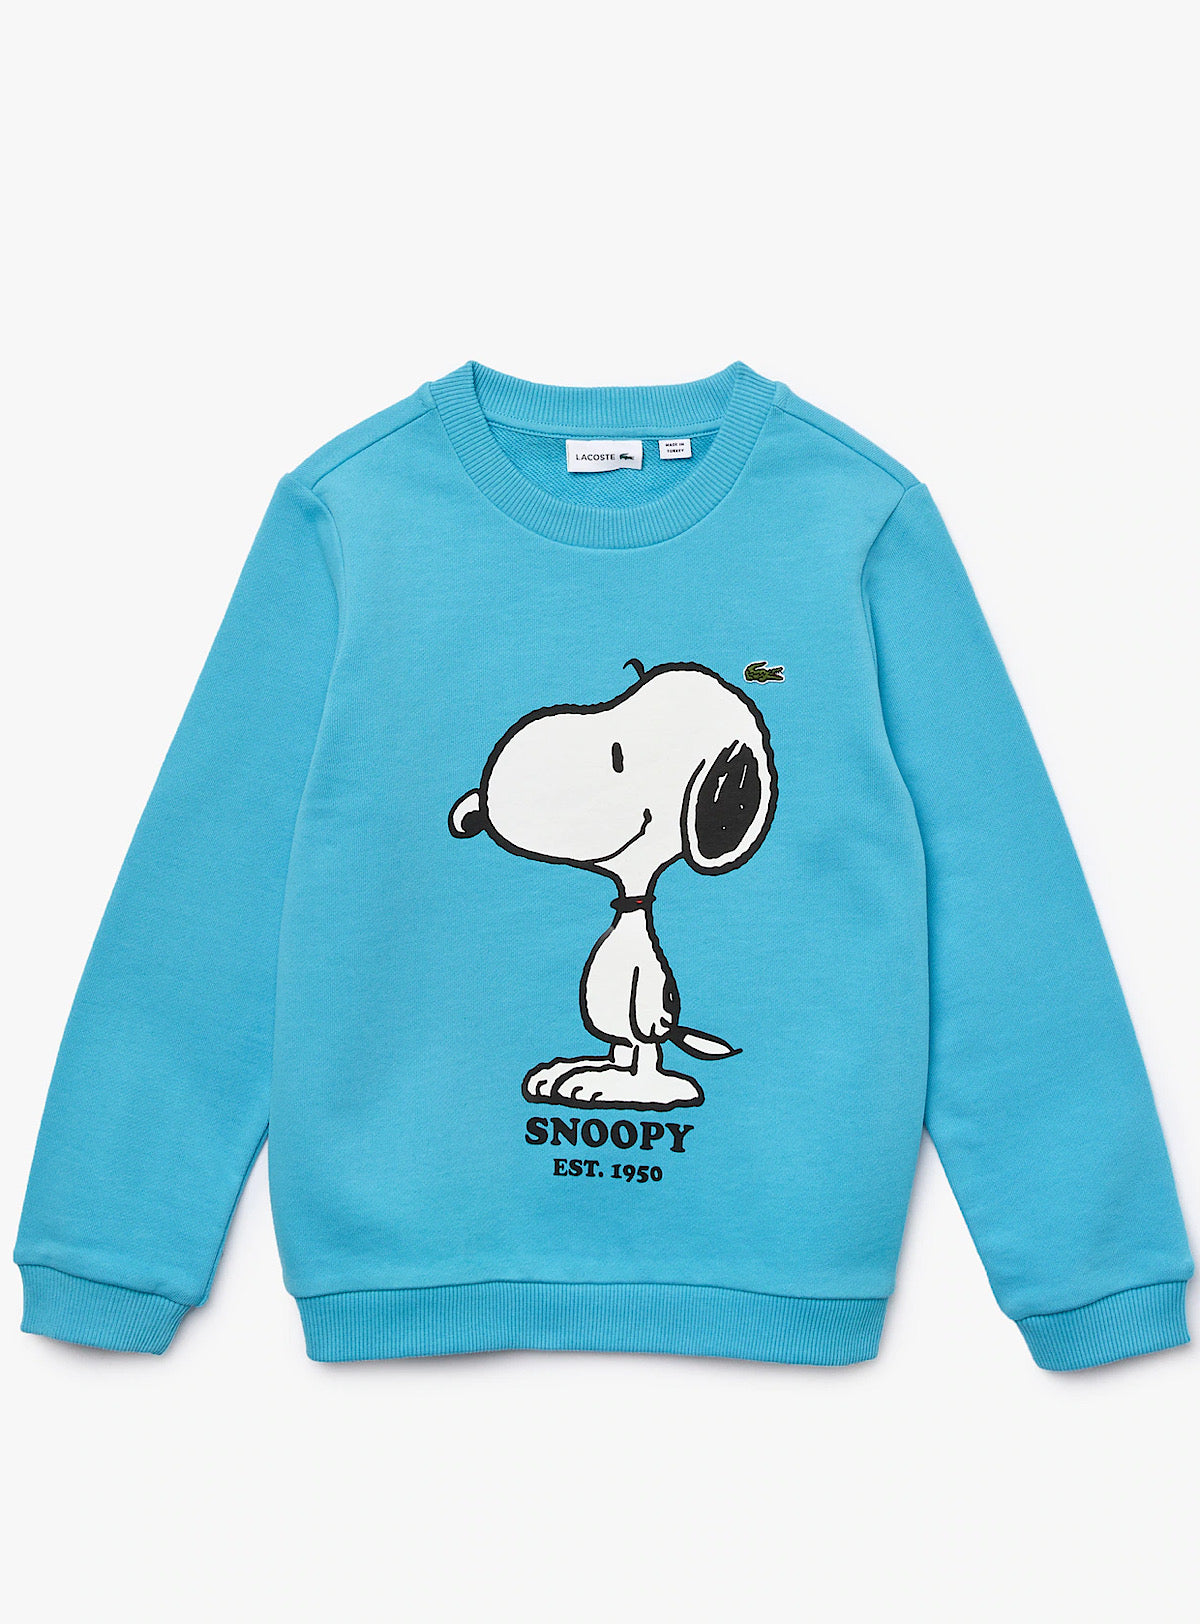 Lacoste Kids Sweater - White And – Blue - Snoopy Vengeance78 - SJ7890